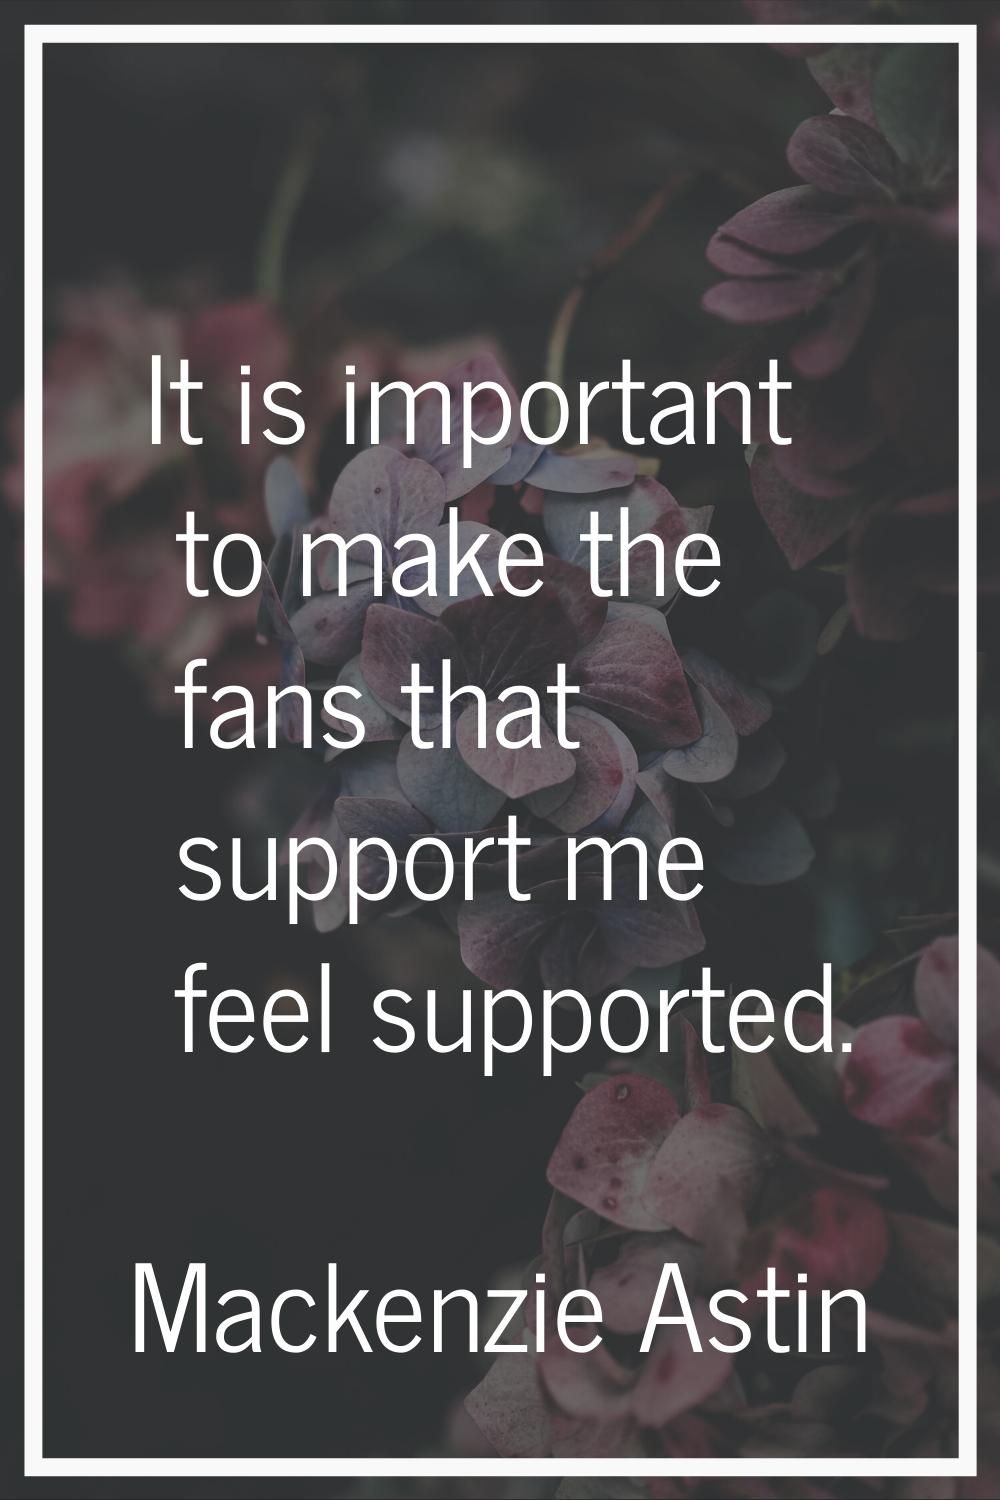 It is important to make the fans that support me feel supported.